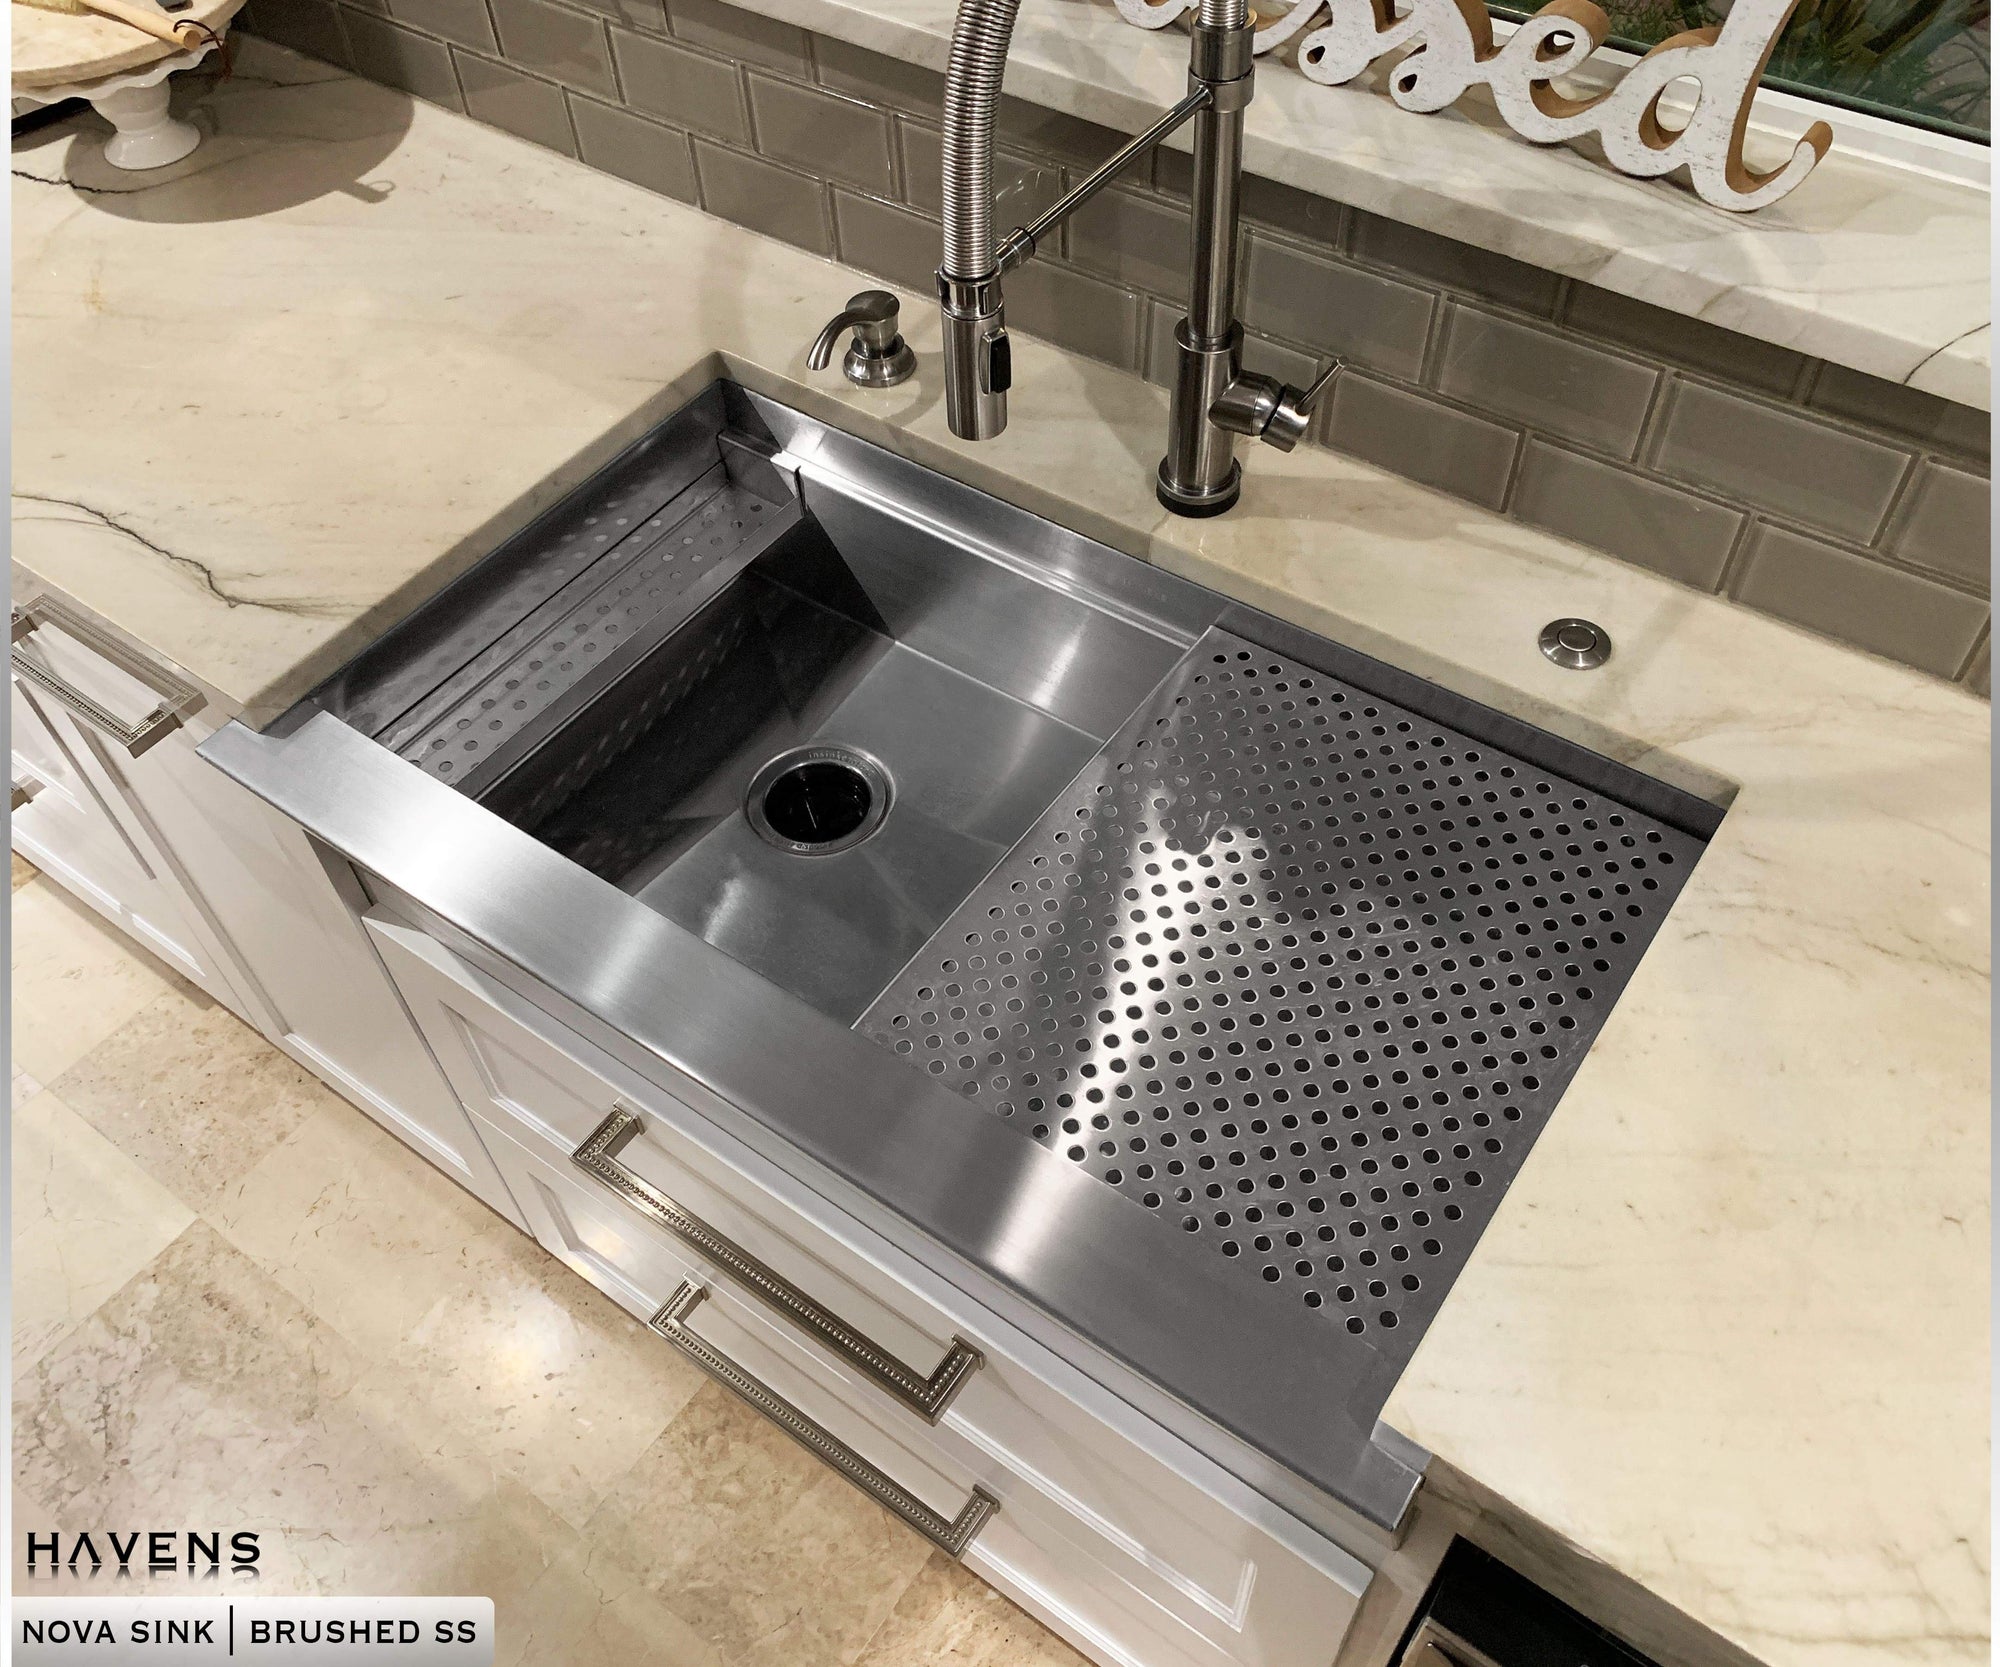 Nova Stainless Steel sink with sponge caddy installed on left of sink